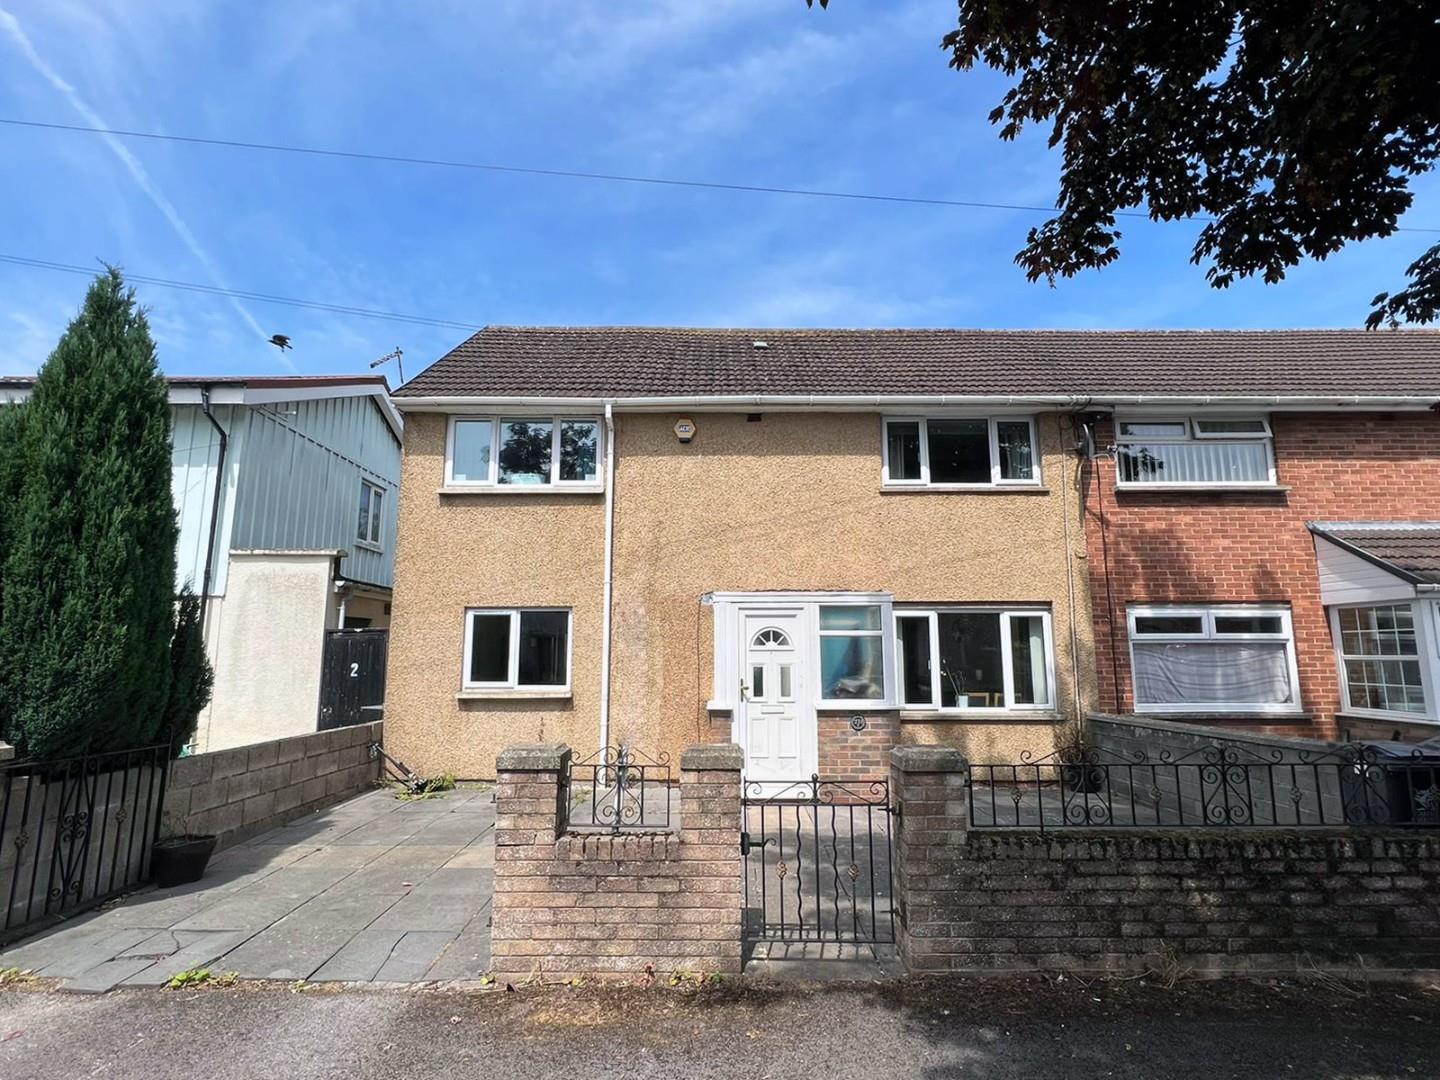 3 bed  for sale in Aberdulais Road, Cardiff, CF14